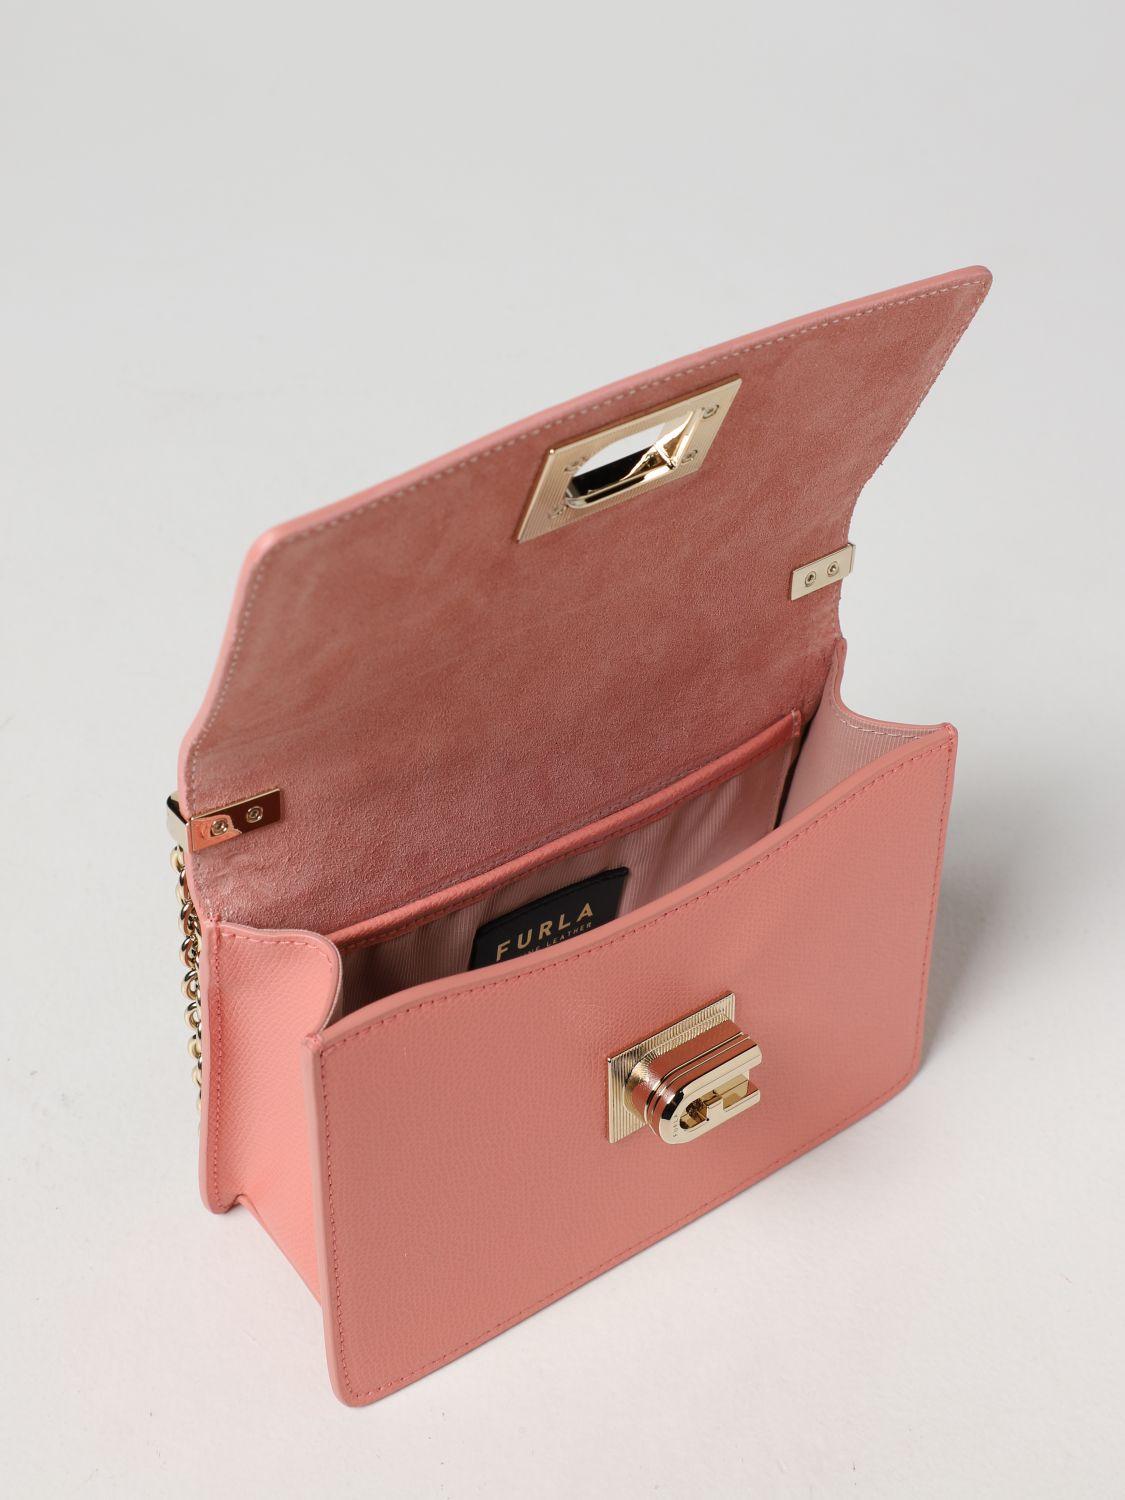 Furla 1927 Bag In Micro-grained Leather in Pink